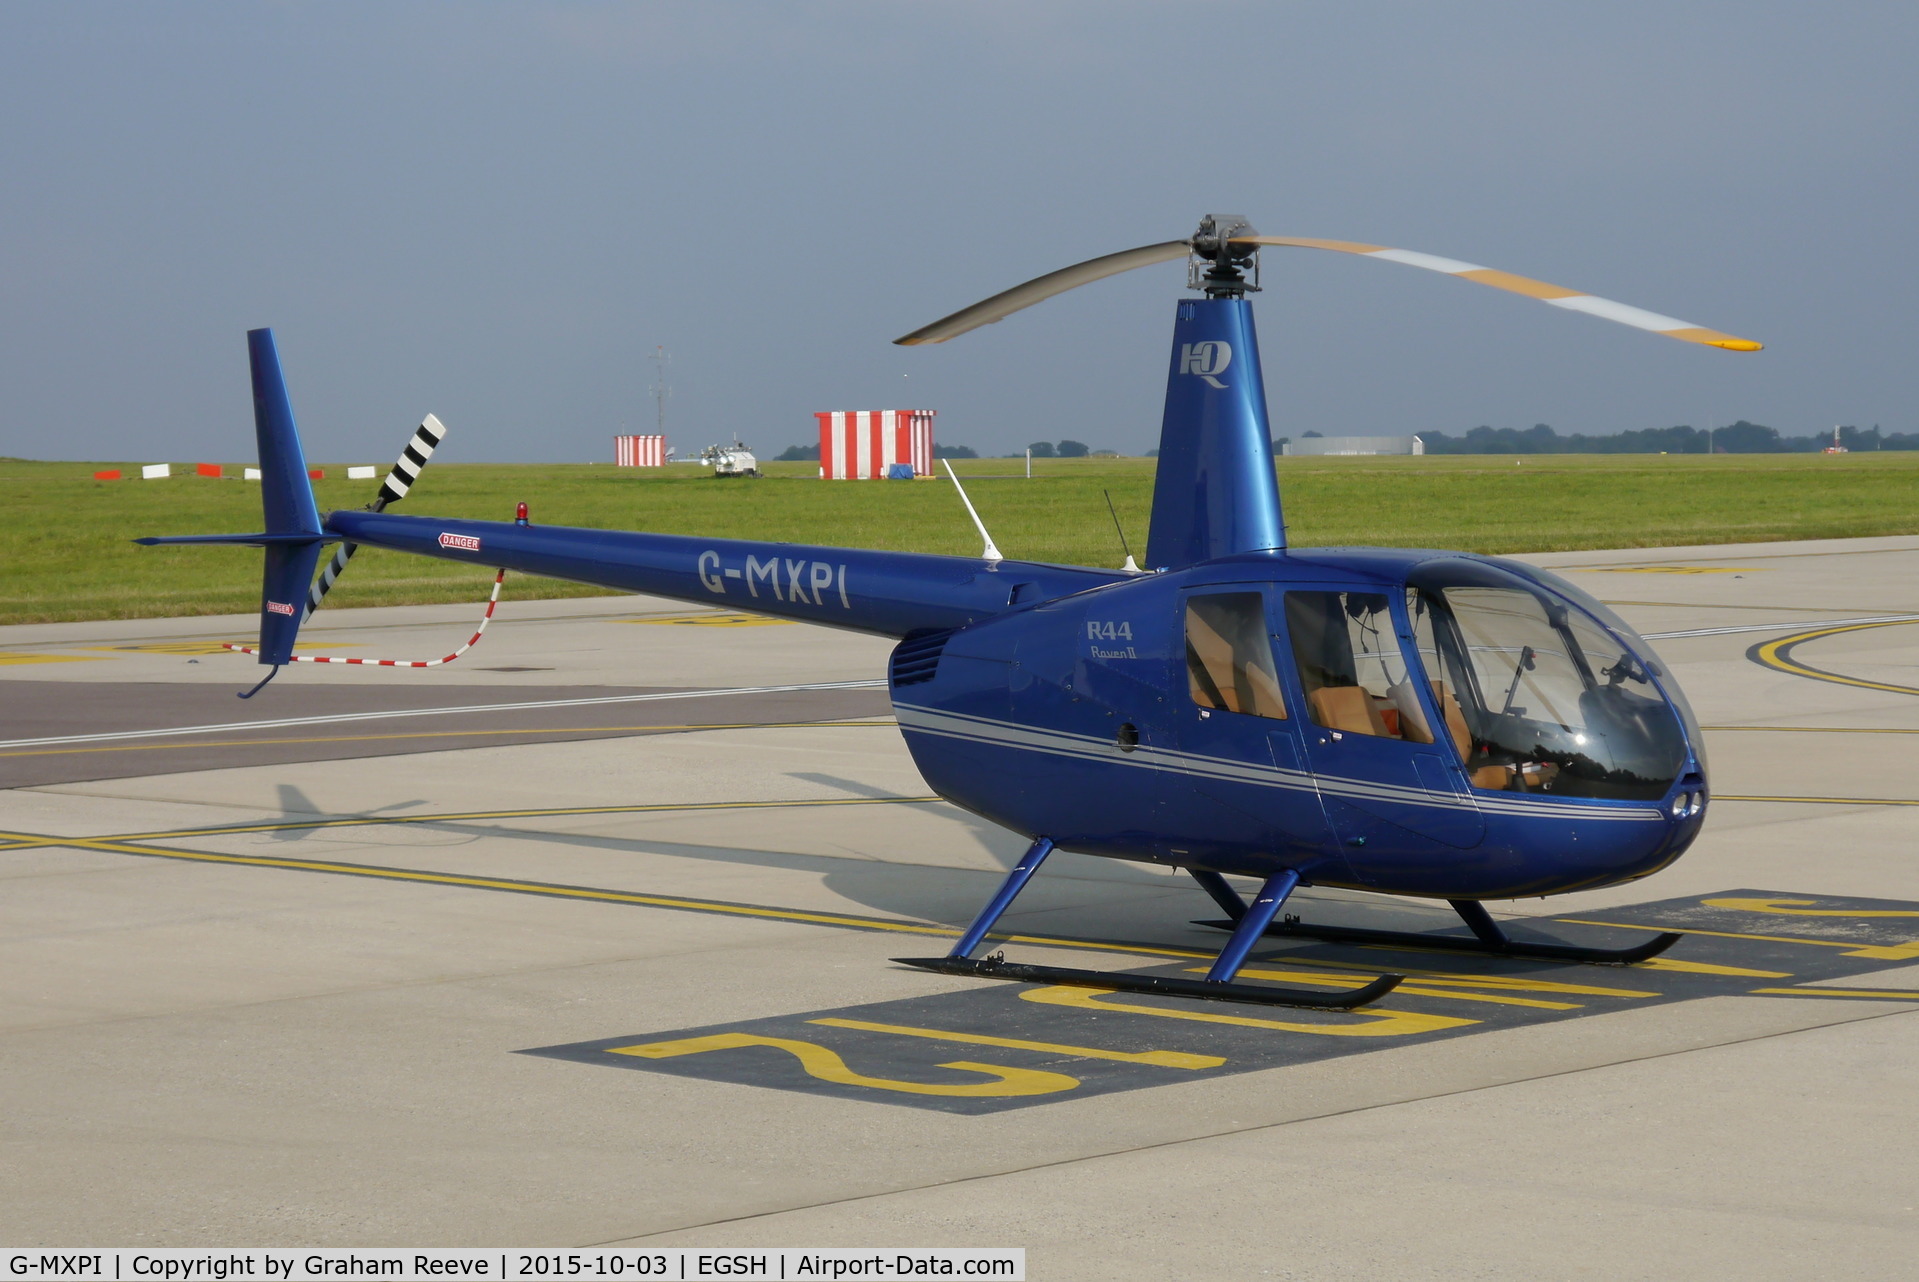 G-MXPI, 2009 Robinson R44 Raven II C/N 12827, Parked at Norwich.